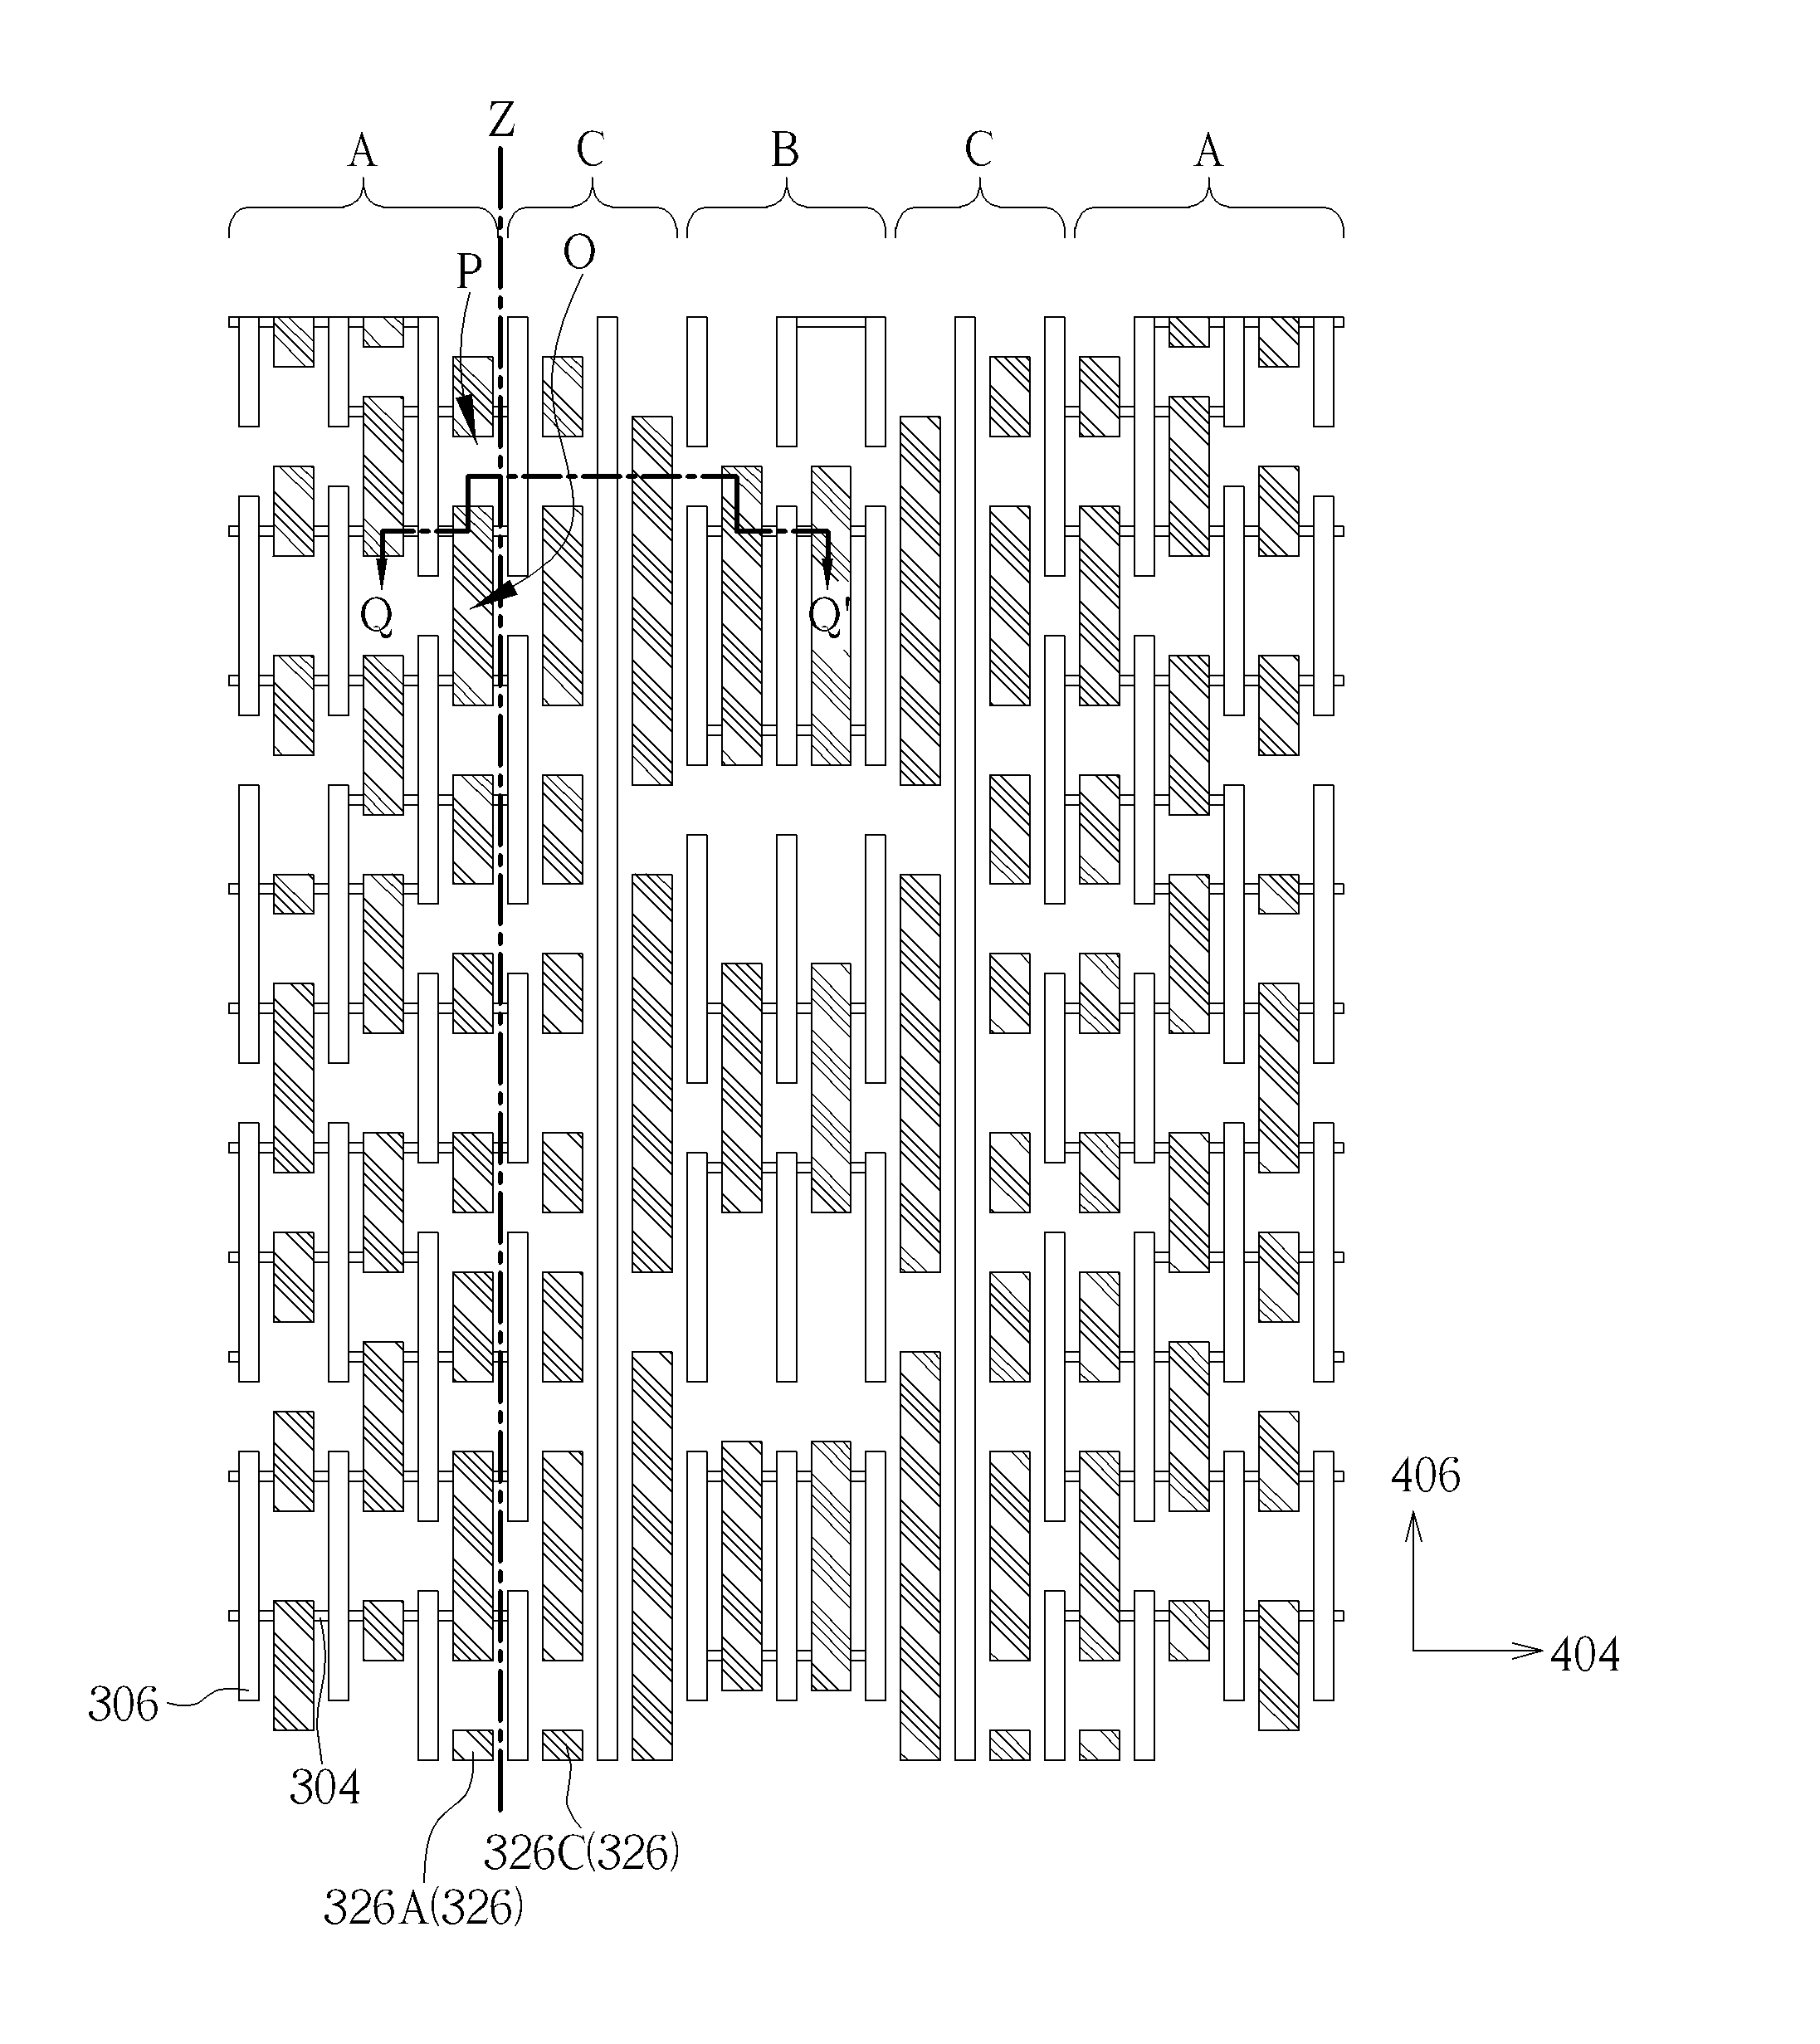 Semiconductor structure having a center dummy region